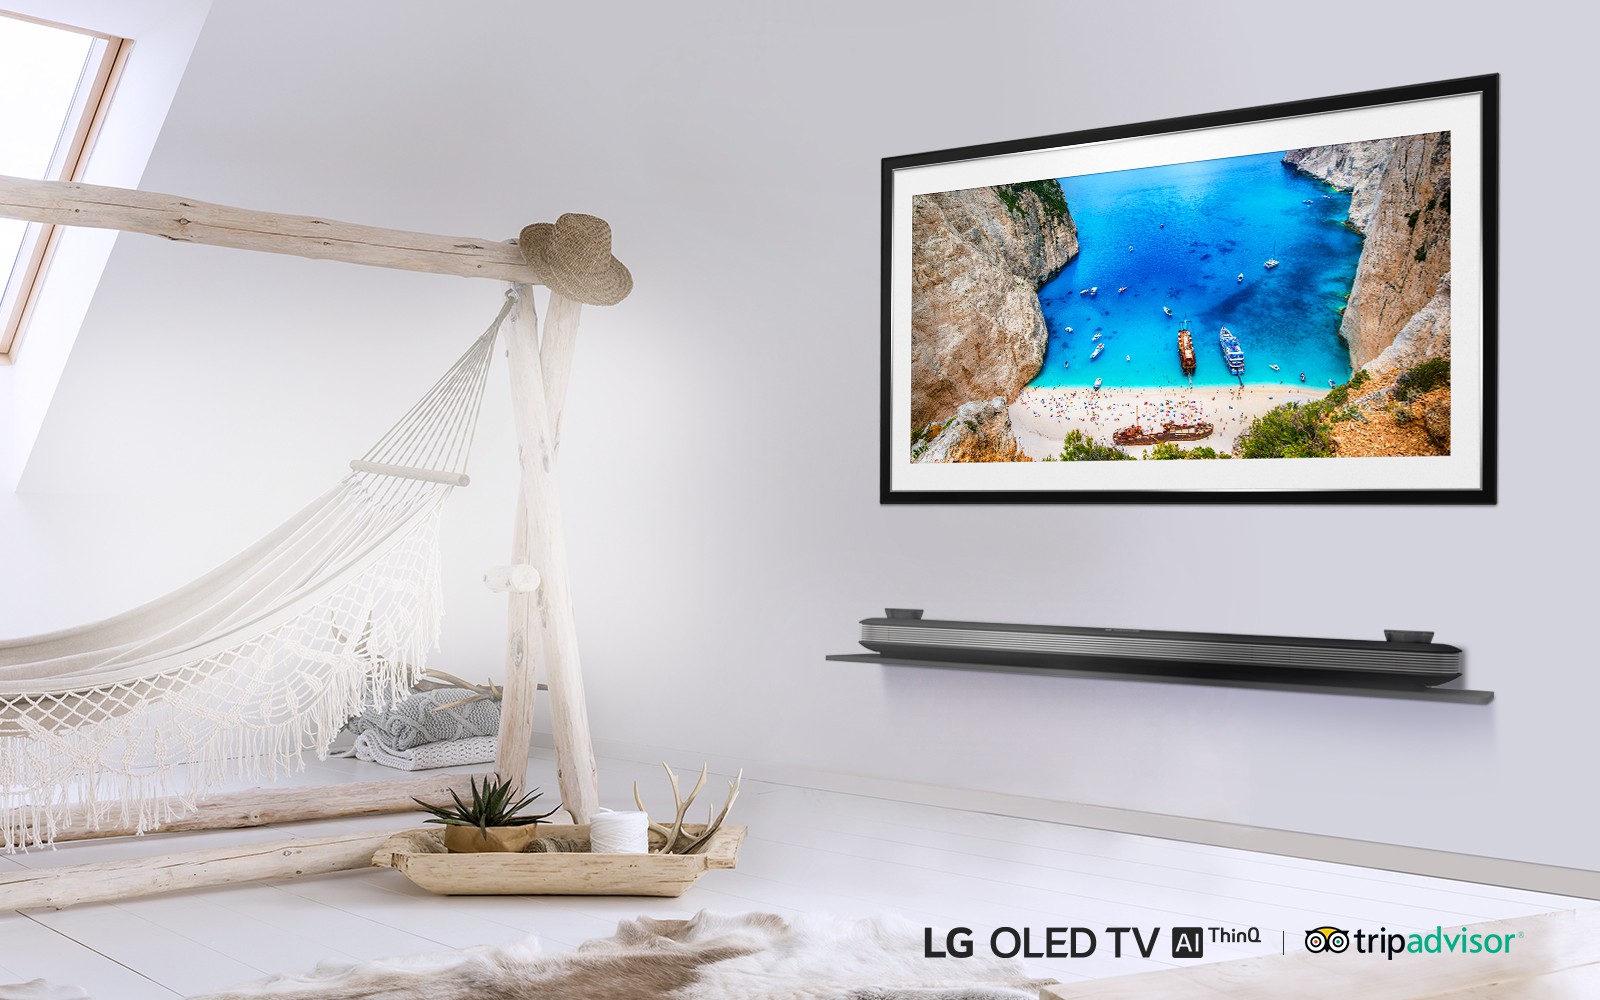 LG SIGNATURE OLED TV W in a room with a hammock displaying an image of boats on the coast of a rocky island.